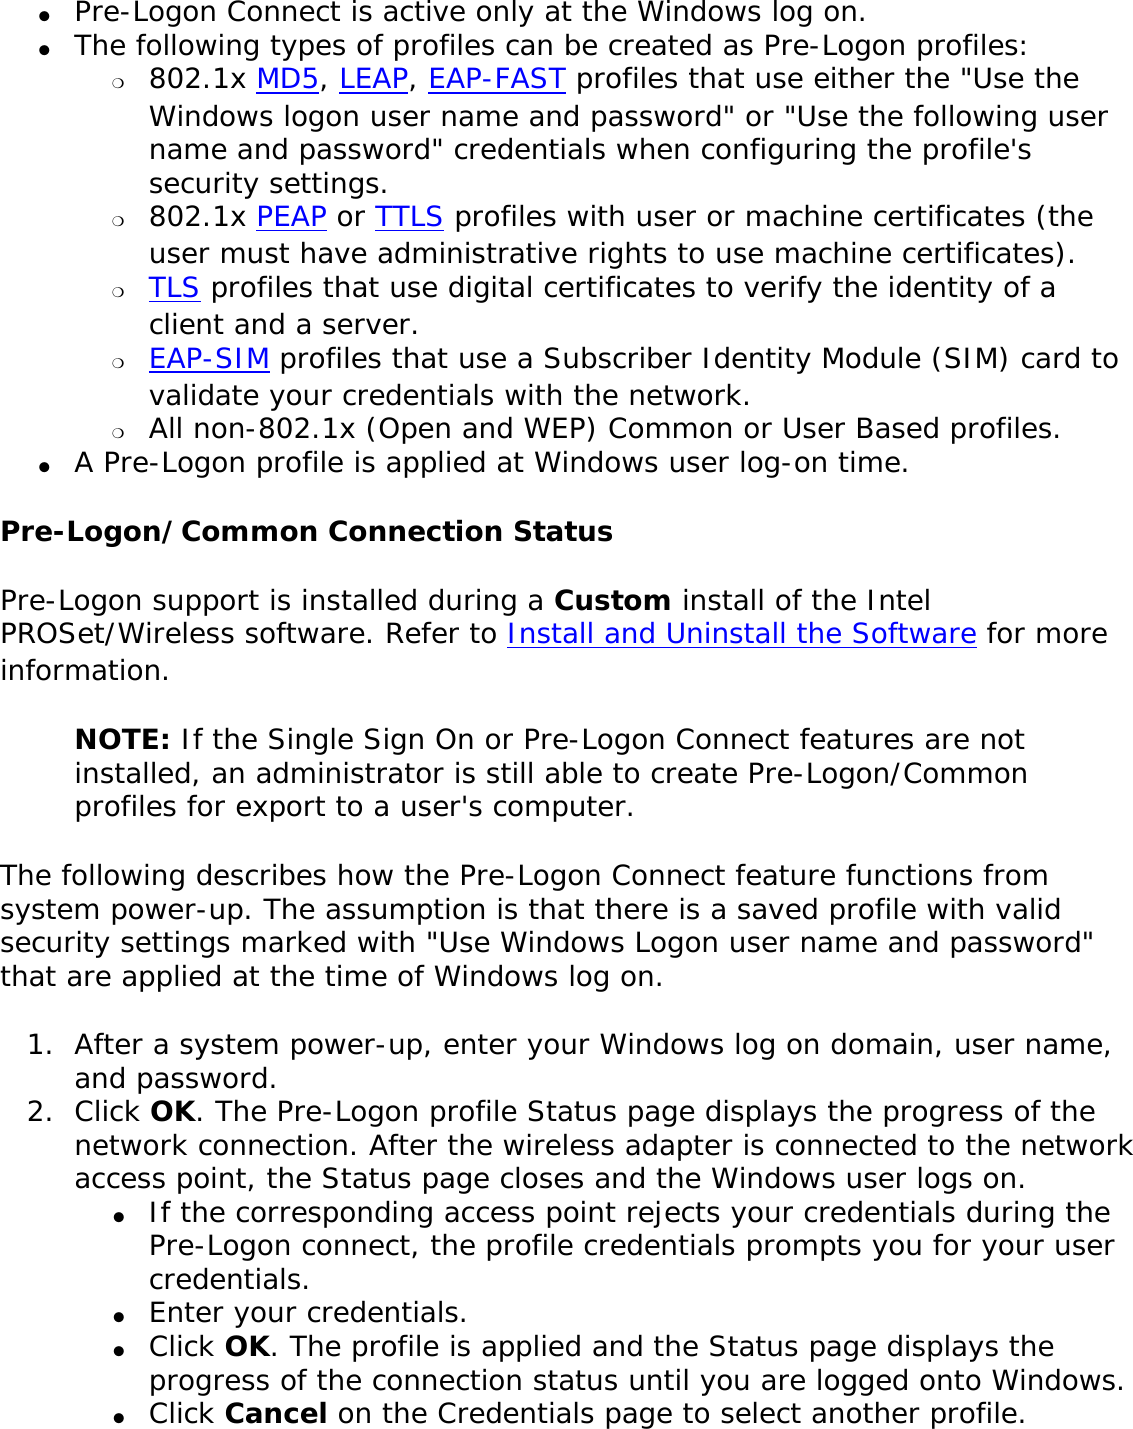 ●     Pre-Logon Connect is active only at the Windows log on.●     The following types of profiles can be created as Pre-Logon profiles: ❍     802.1x MD5, LEAP, EAP-FAST profiles that use either the &quot;Use the Windows logon user name and password&quot; or &quot;Use the following user name and password&quot; credentials when configuring the profile&apos;s security settings. ❍     802.1x PEAP or TTLS profiles with user or machine certificates (the user must have administrative rights to use machine certificates).❍     TLS profiles that use digital certificates to verify the identity of a client and a server. ❍     EAP-SIM profiles that use a Subscriber Identity Module (SIM) card to validate your credentials with the network. ❍     All non-802.1x (Open and WEP) Common or User Based profiles.●     A Pre-Logon profile is applied at Windows user log-on time.Pre-Logon/Common Connection Status Pre-Logon support is installed during a Custom install of the Intel PROSet/Wireless software. Refer to Install and Uninstall the Software for more information. NOTE: If the Single Sign On or Pre-Logon Connect features are not installed, an administrator is still able to create Pre-Logon/Common profiles for export to a user&apos;s computer. The following describes how the Pre-Logon Connect feature functions from system power-up. The assumption is that there is a saved profile with valid security settings marked with &quot;Use Windows Logon user name and password&quot; that are applied at the time of Windows log on. 1.  After a system power-up, enter your Windows log on domain, user name, and password.2.  Click OK. The Pre-Logon profile Status page displays the progress of the network connection. After the wireless adapter is connected to the network access point, the Status page closes and the Windows user logs on.●     If the corresponding access point rejects your credentials during the Pre-Logon connect, the profile credentials prompts you for your user credentials. ●     Enter your credentials.●     Click OK. The profile is applied and the Status page displays the progress of the connection status until you are logged onto Windows. ●     Click Cancel on the Credentials page to select another profile.